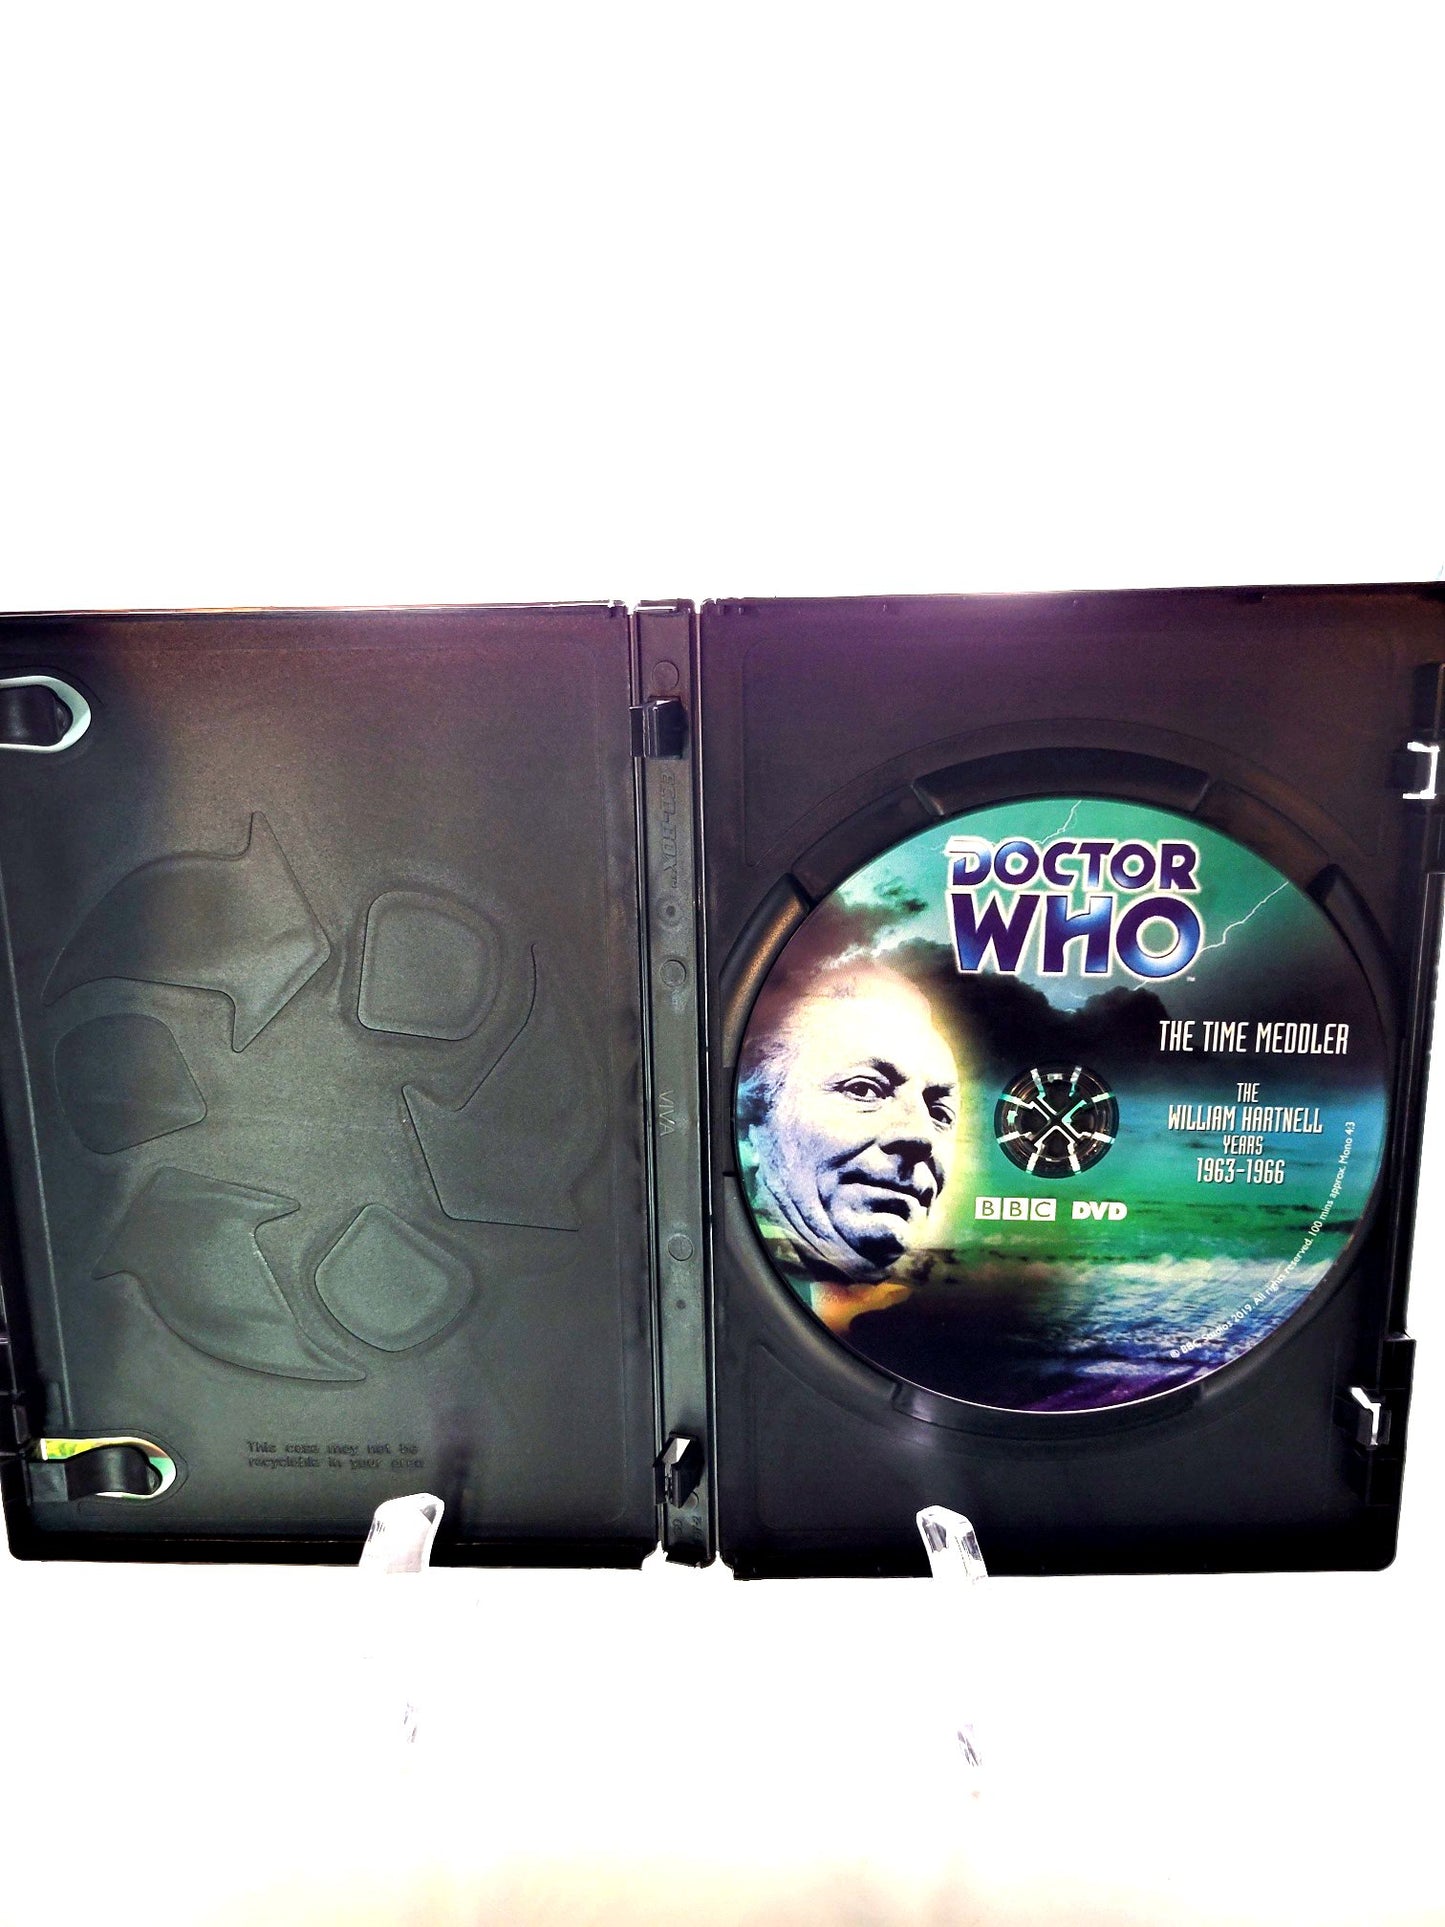 BBC Video Doctor Who The Time Meddler DVD